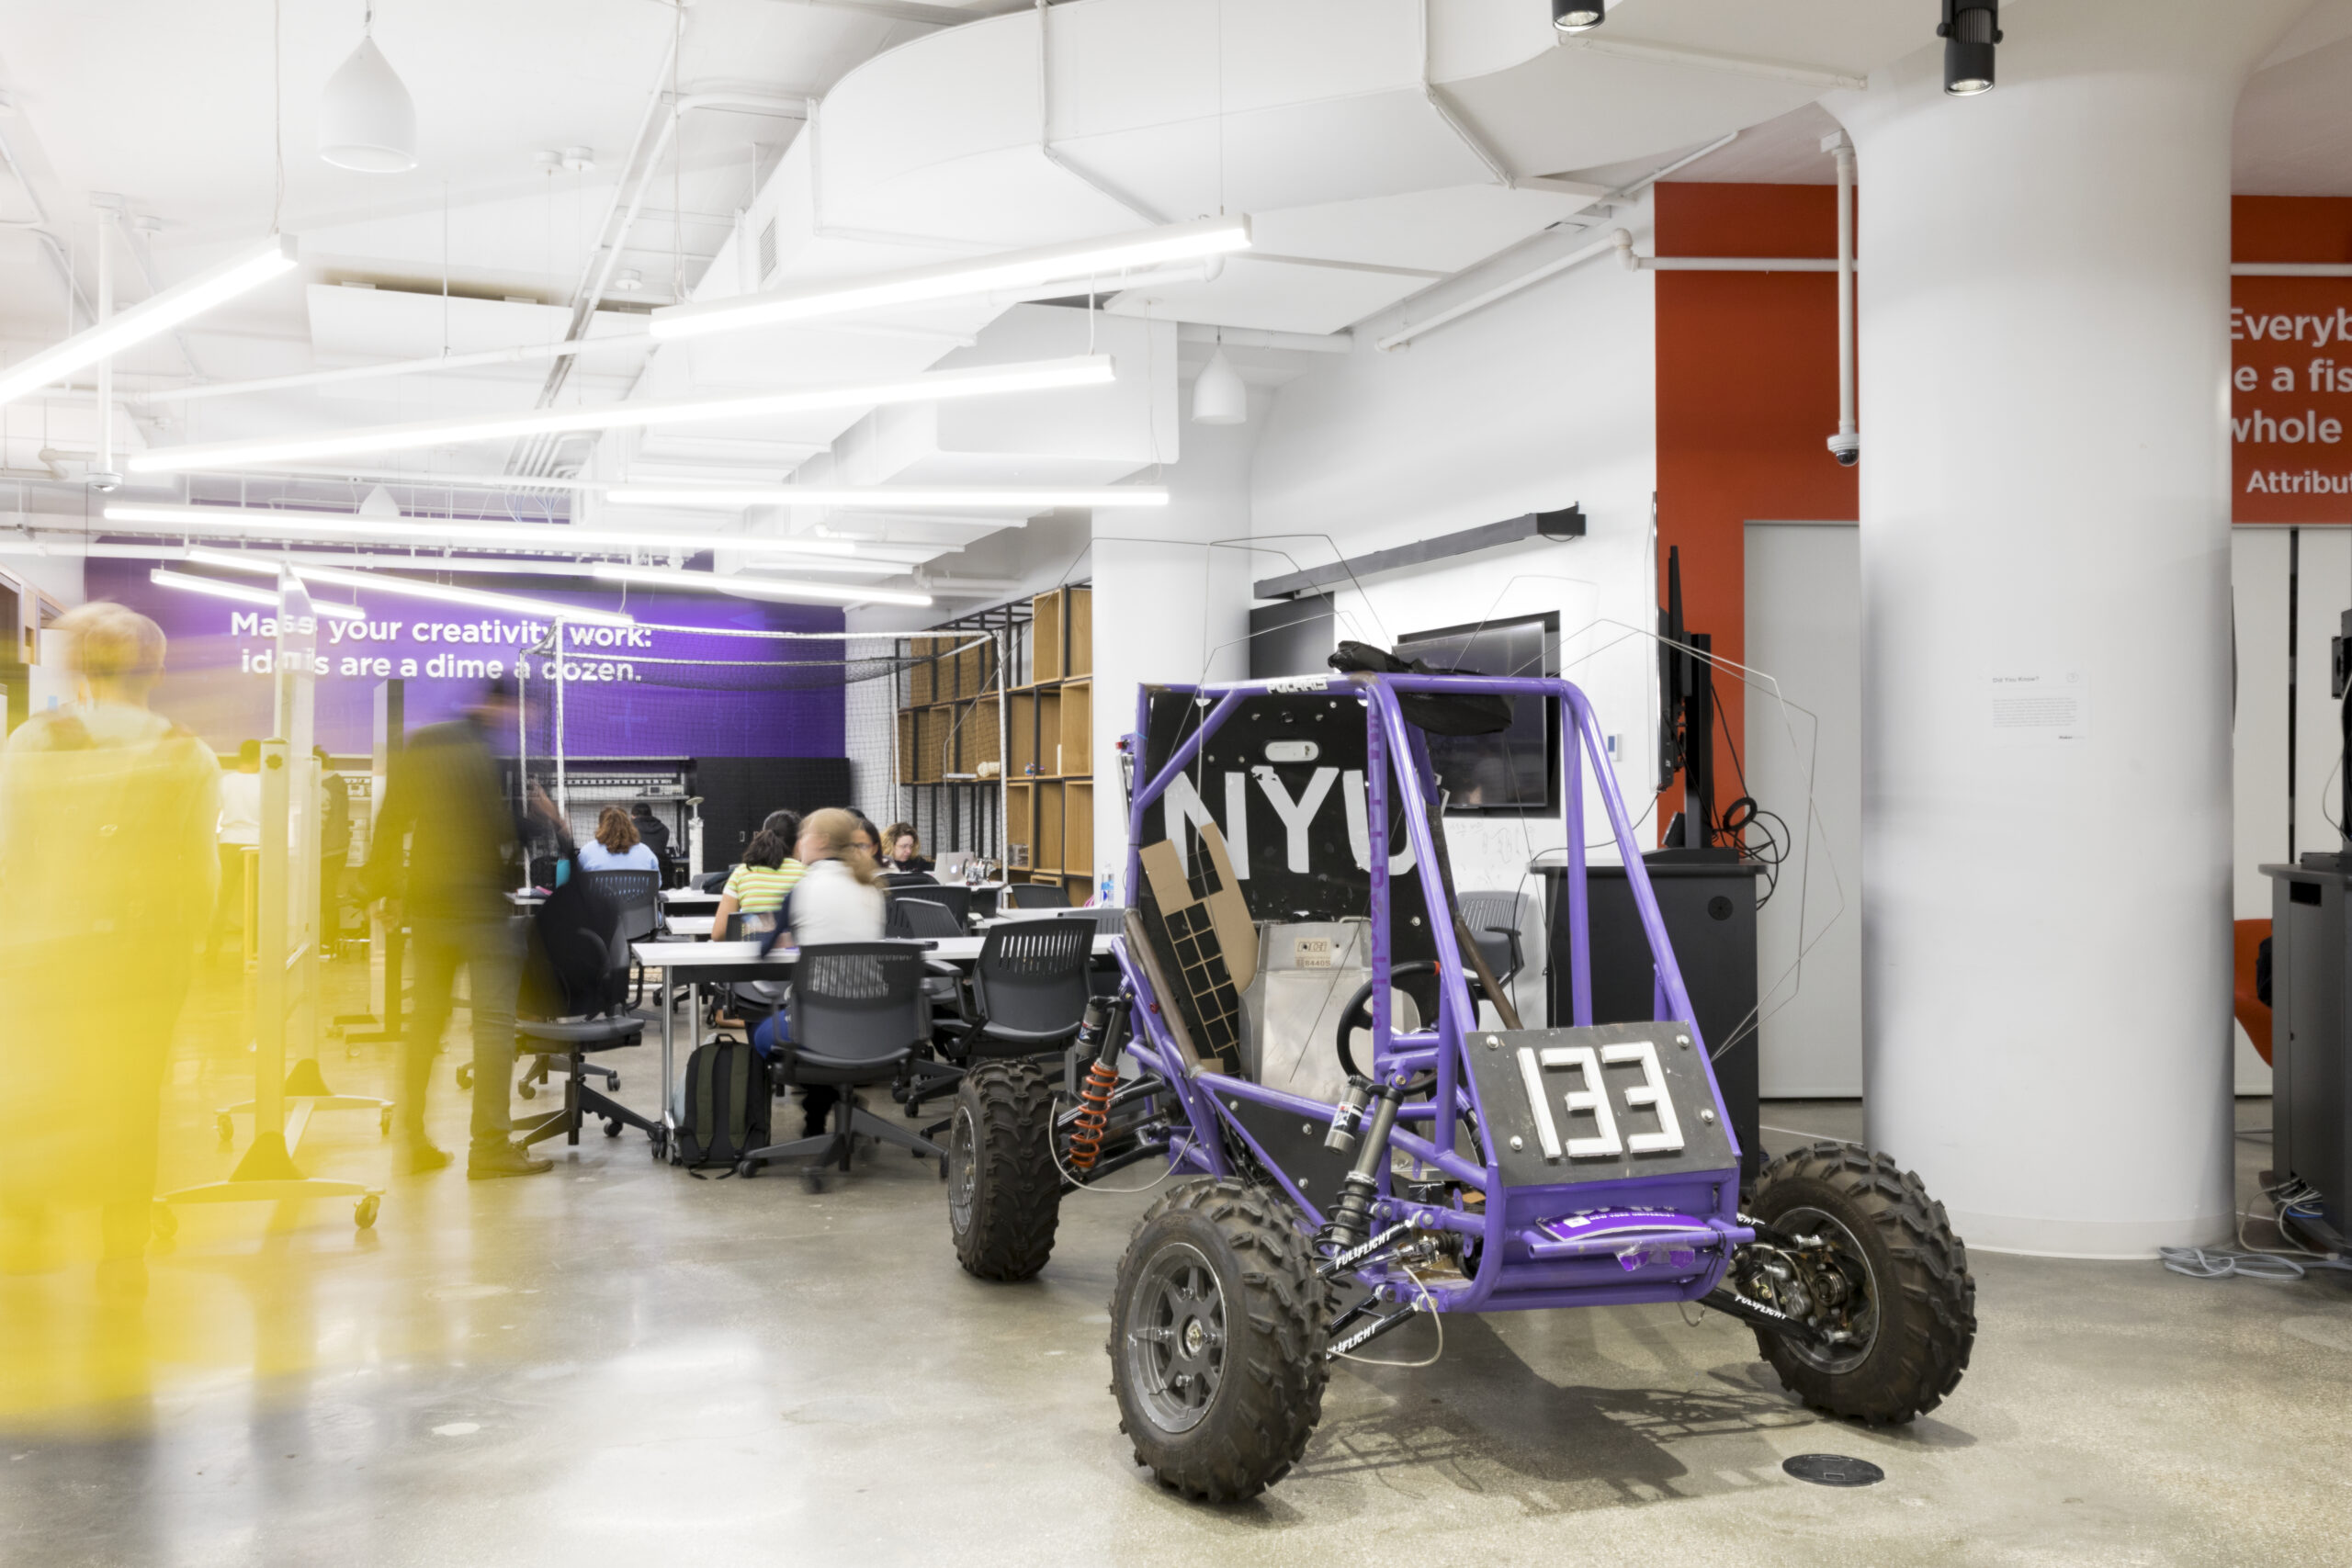 A violet off-road racing machine on display in the MakerSpace at NYU Tandon.